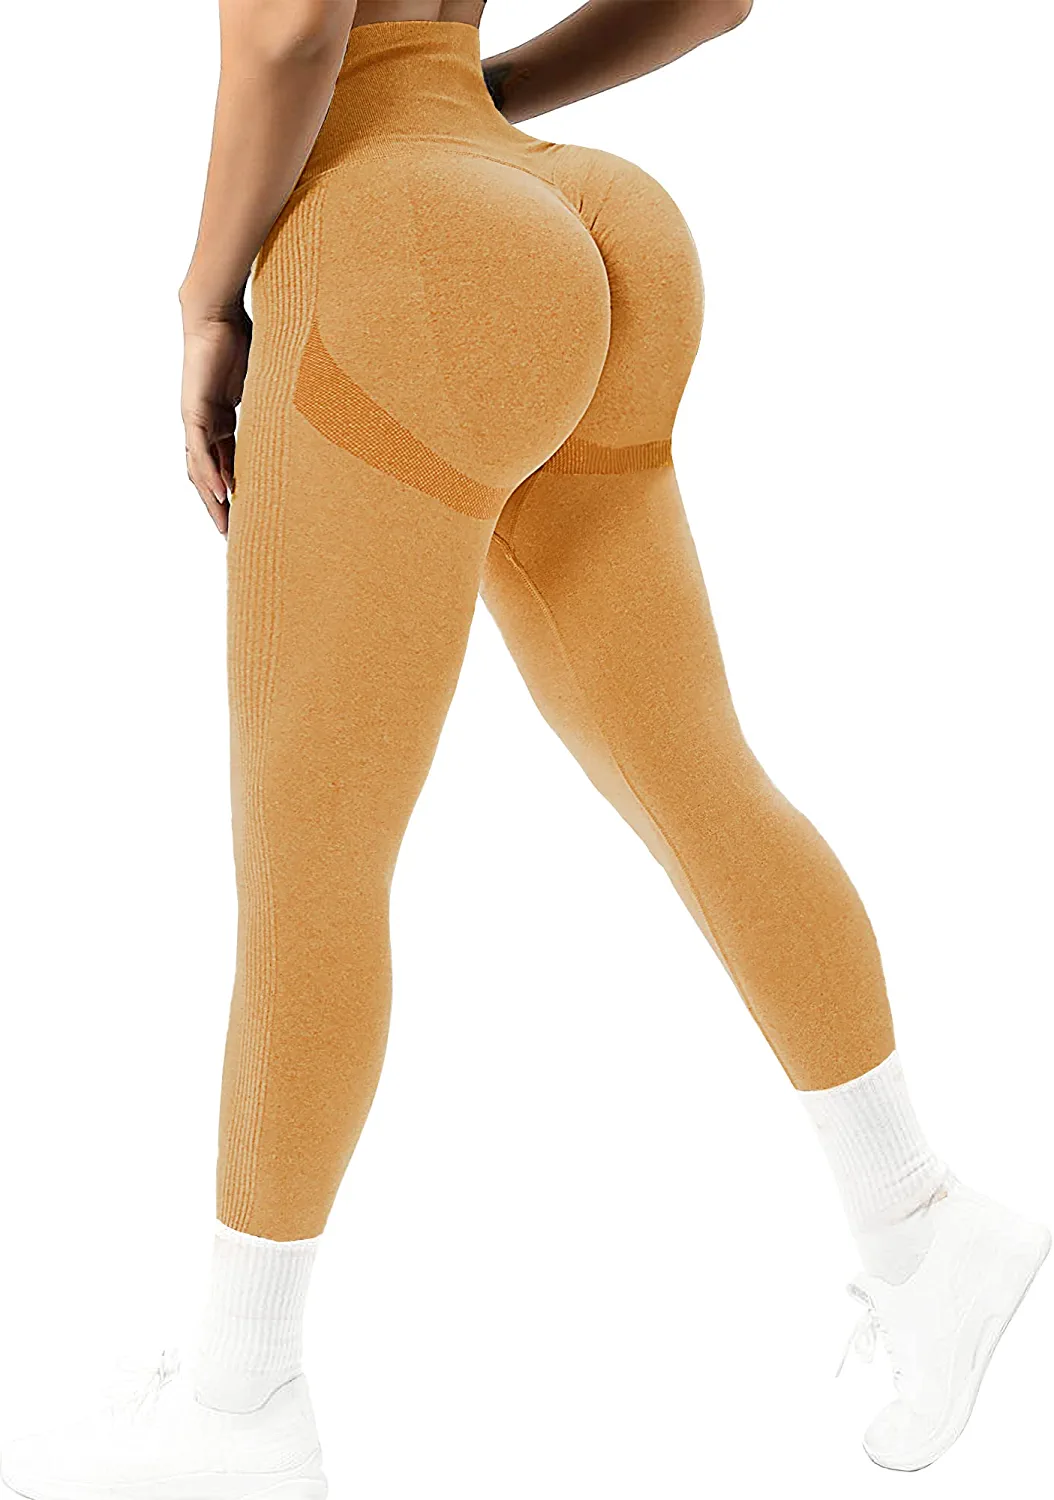 COMFREE Womens Yoga Pants Tummy Control Tights Butt Lifter Casual Gym  Leggings High Waisted Workout Pants